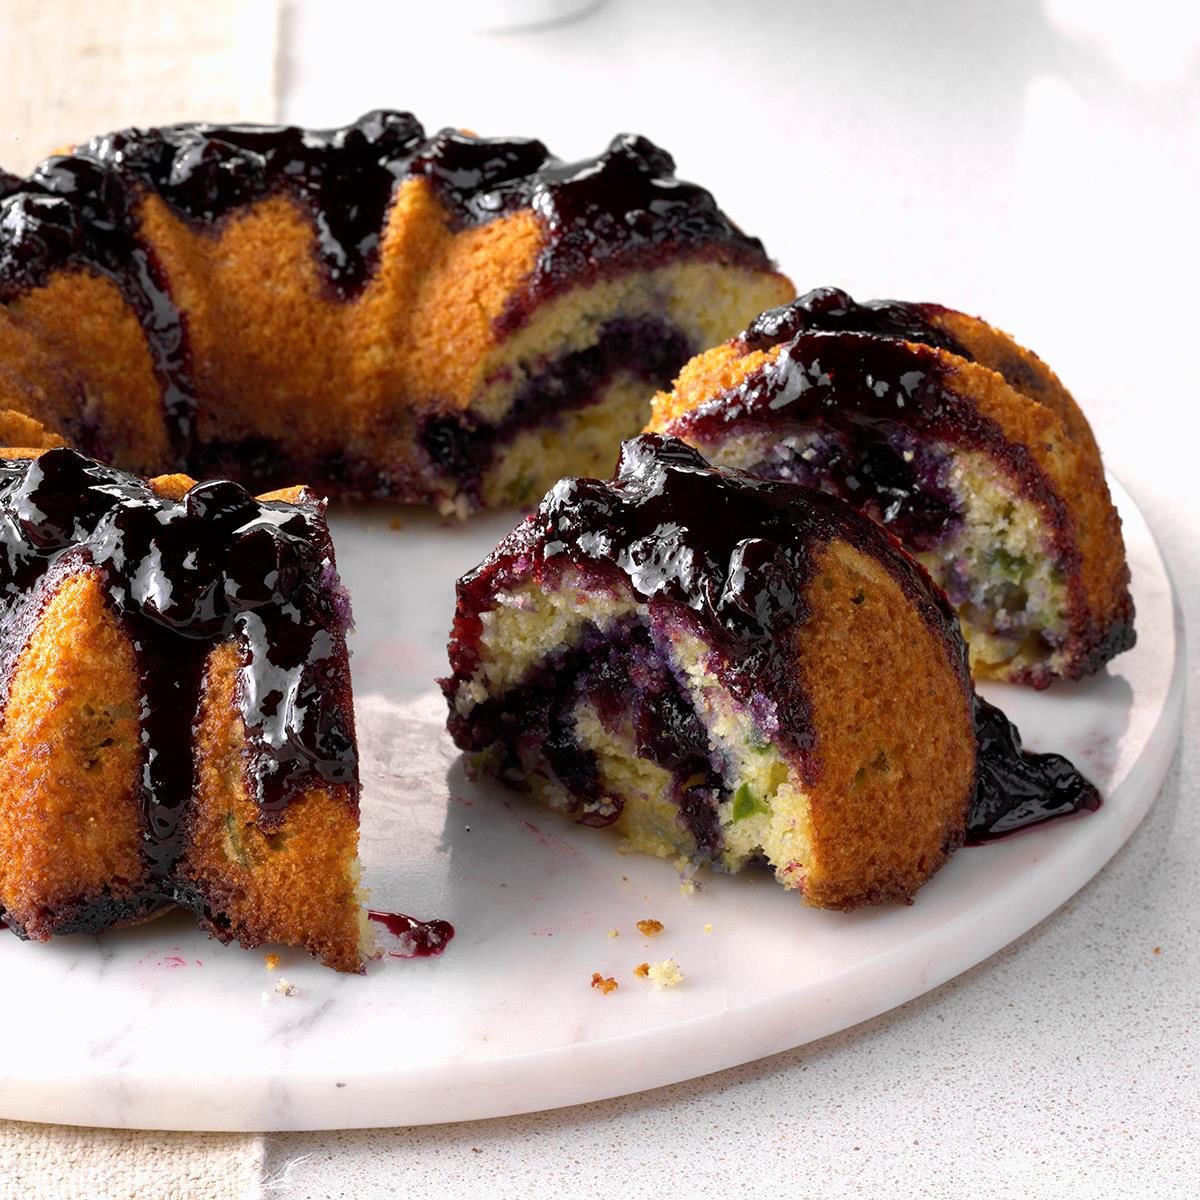 Jalapeno Corn Bread Filled With Blueberry Quick Jam Exps Tham18 208697 C11 14 5b 5